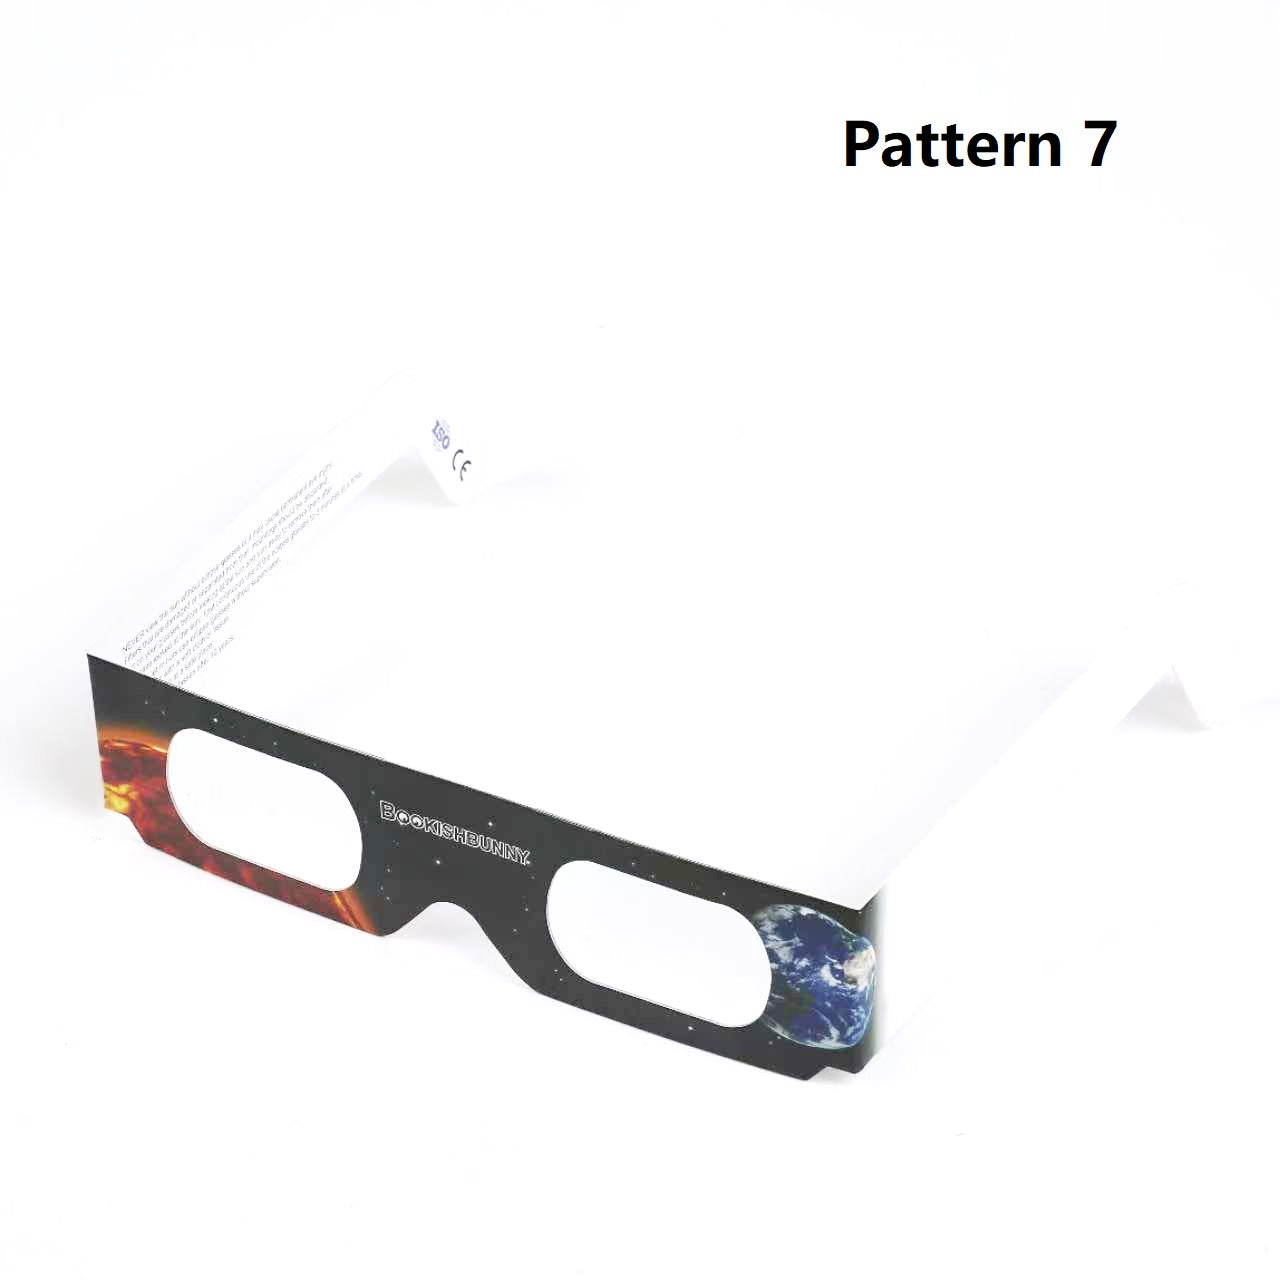 50 Pairs Bookishbunny Solar Eclipse Viewers Paper Glasses Sun Viewing